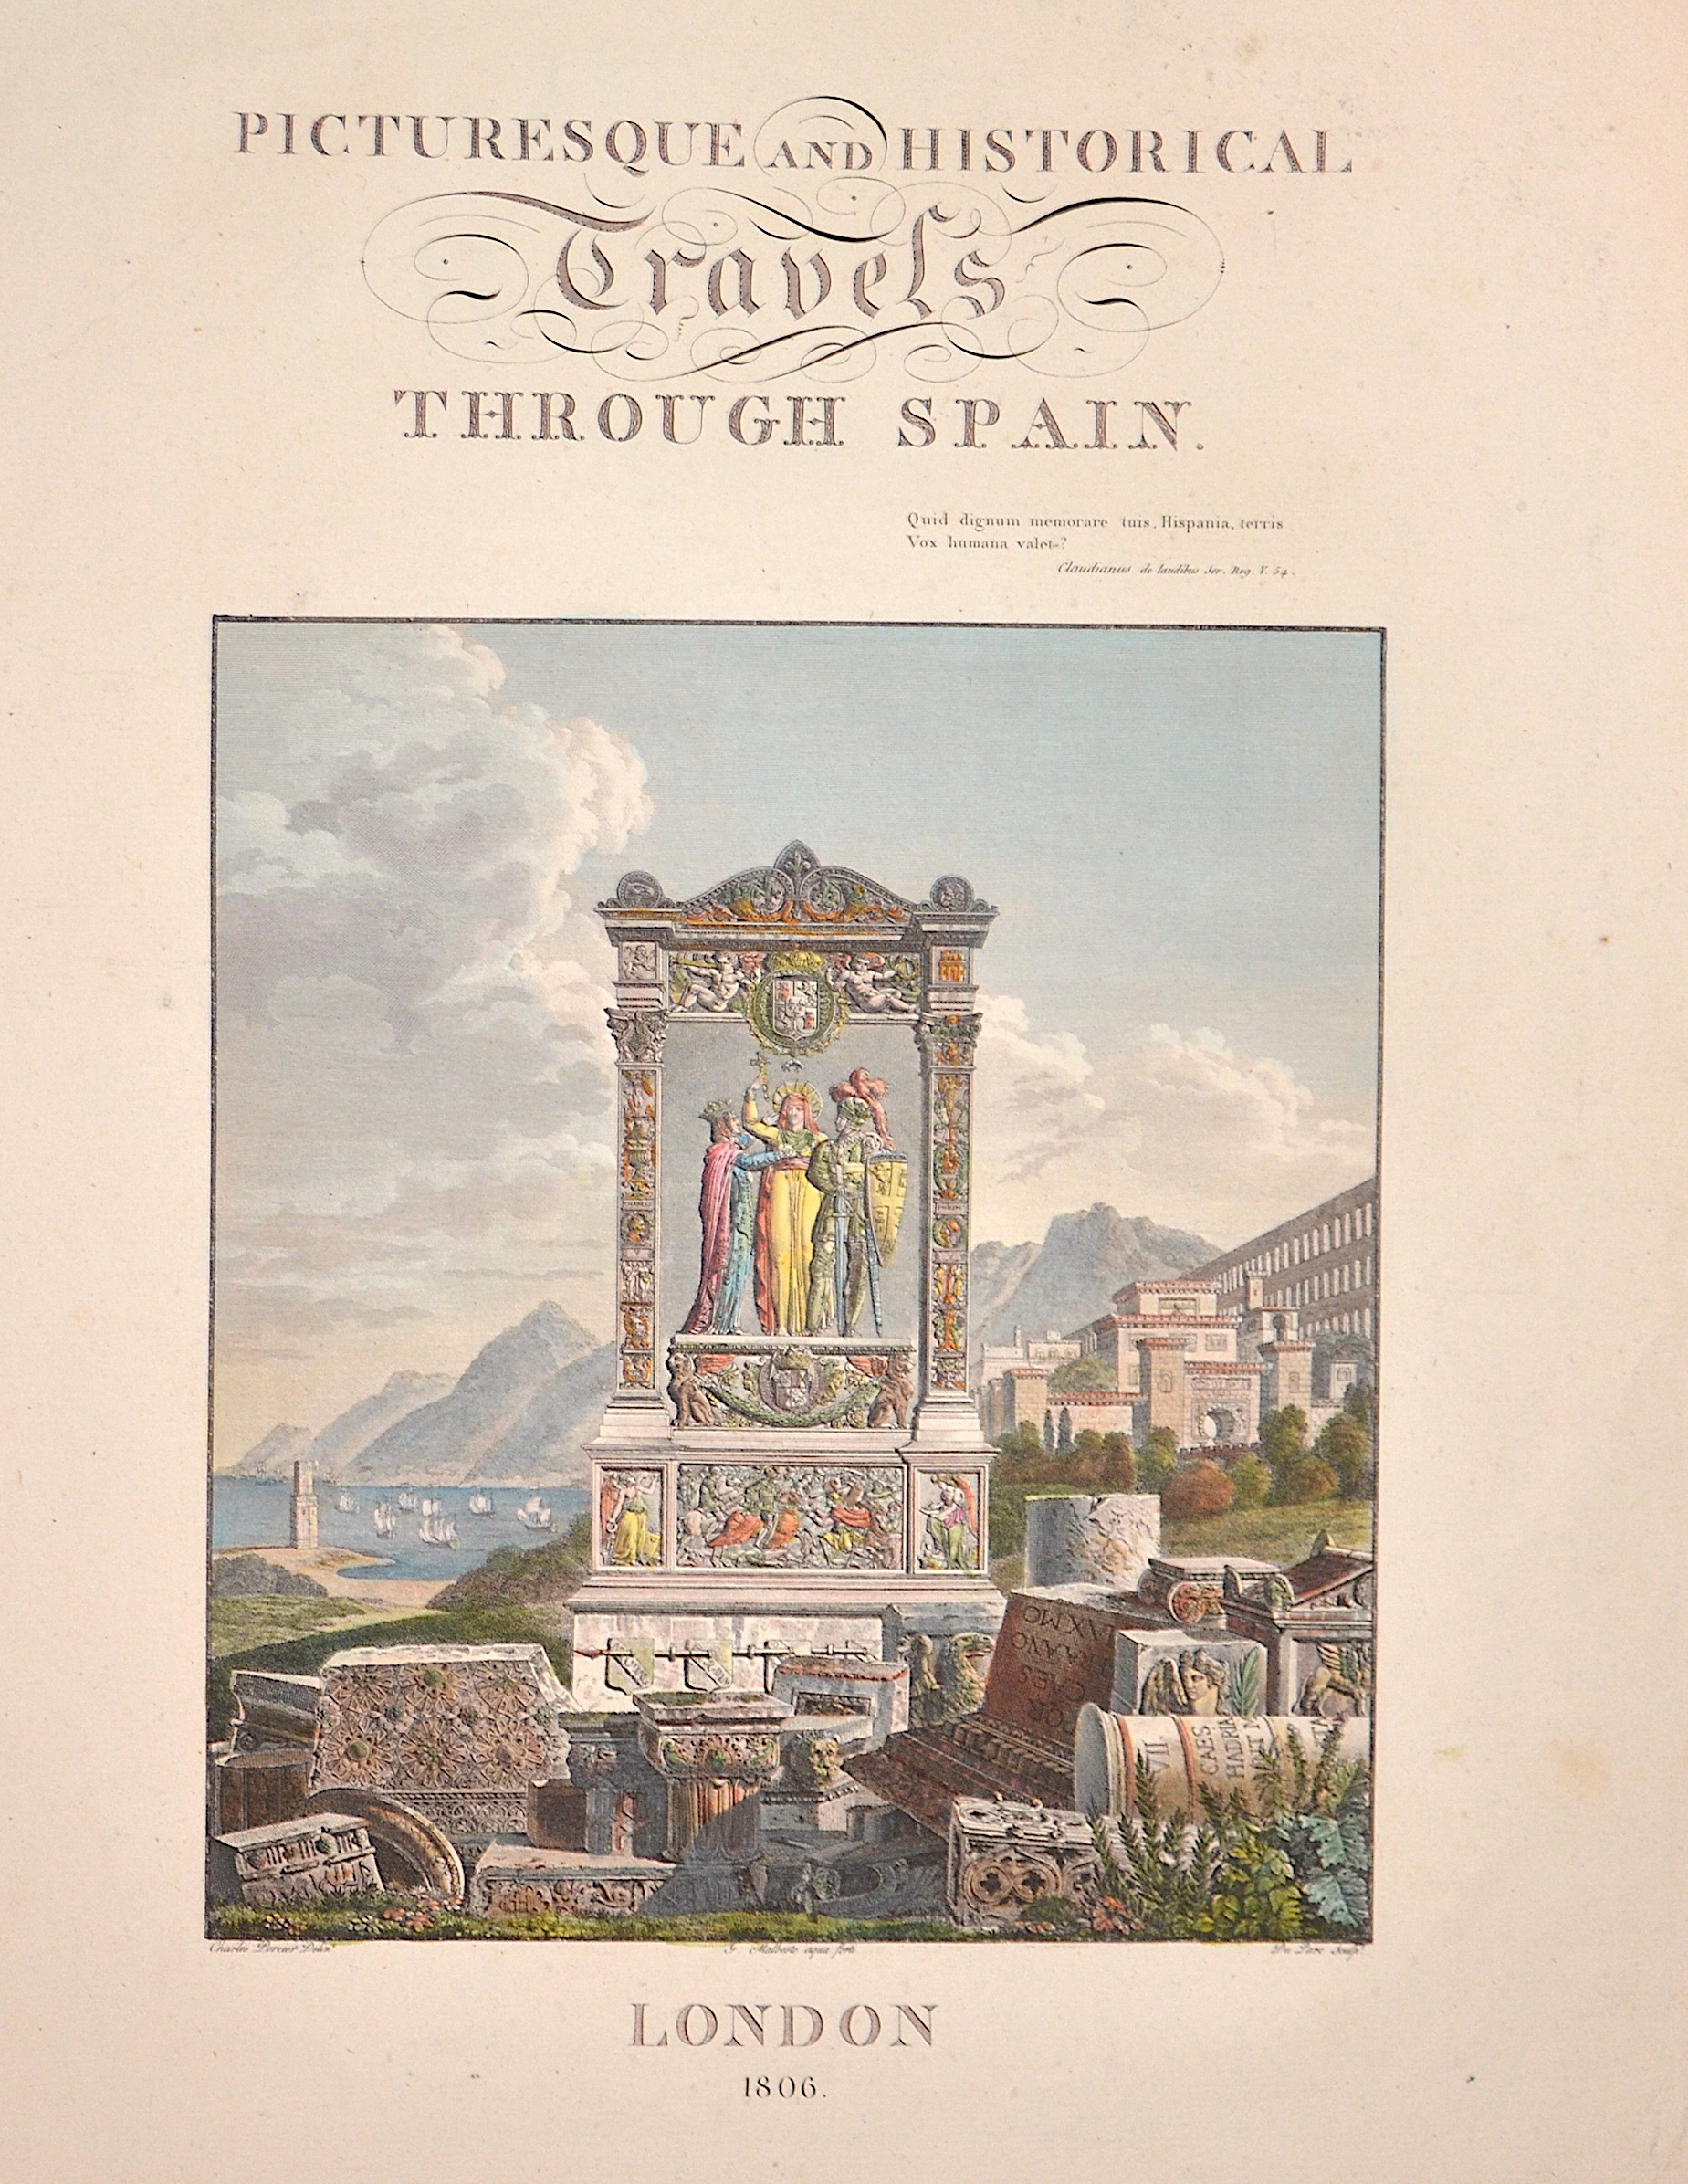 Percier  Picturesque and Historical Travels through Spain. / London 1806